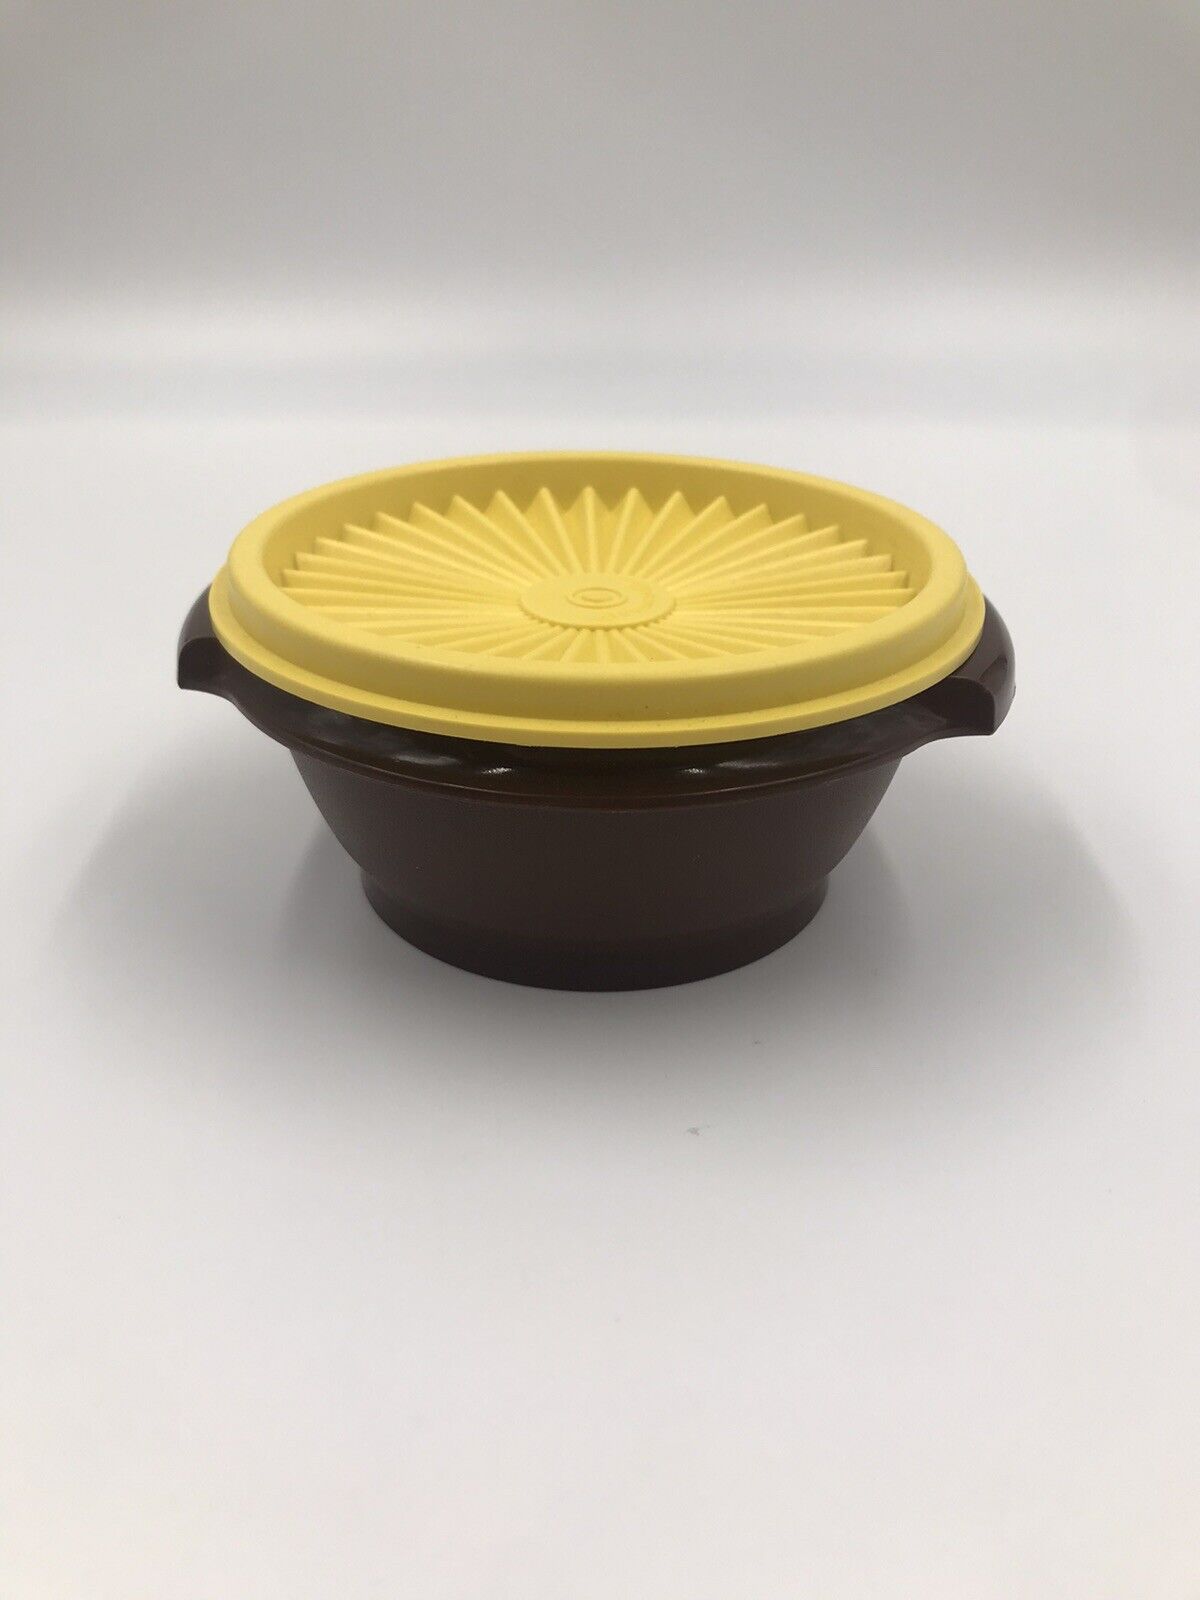 Vintage Tupperware 1323-24 Small Container w/ Lid Yellow | eBay